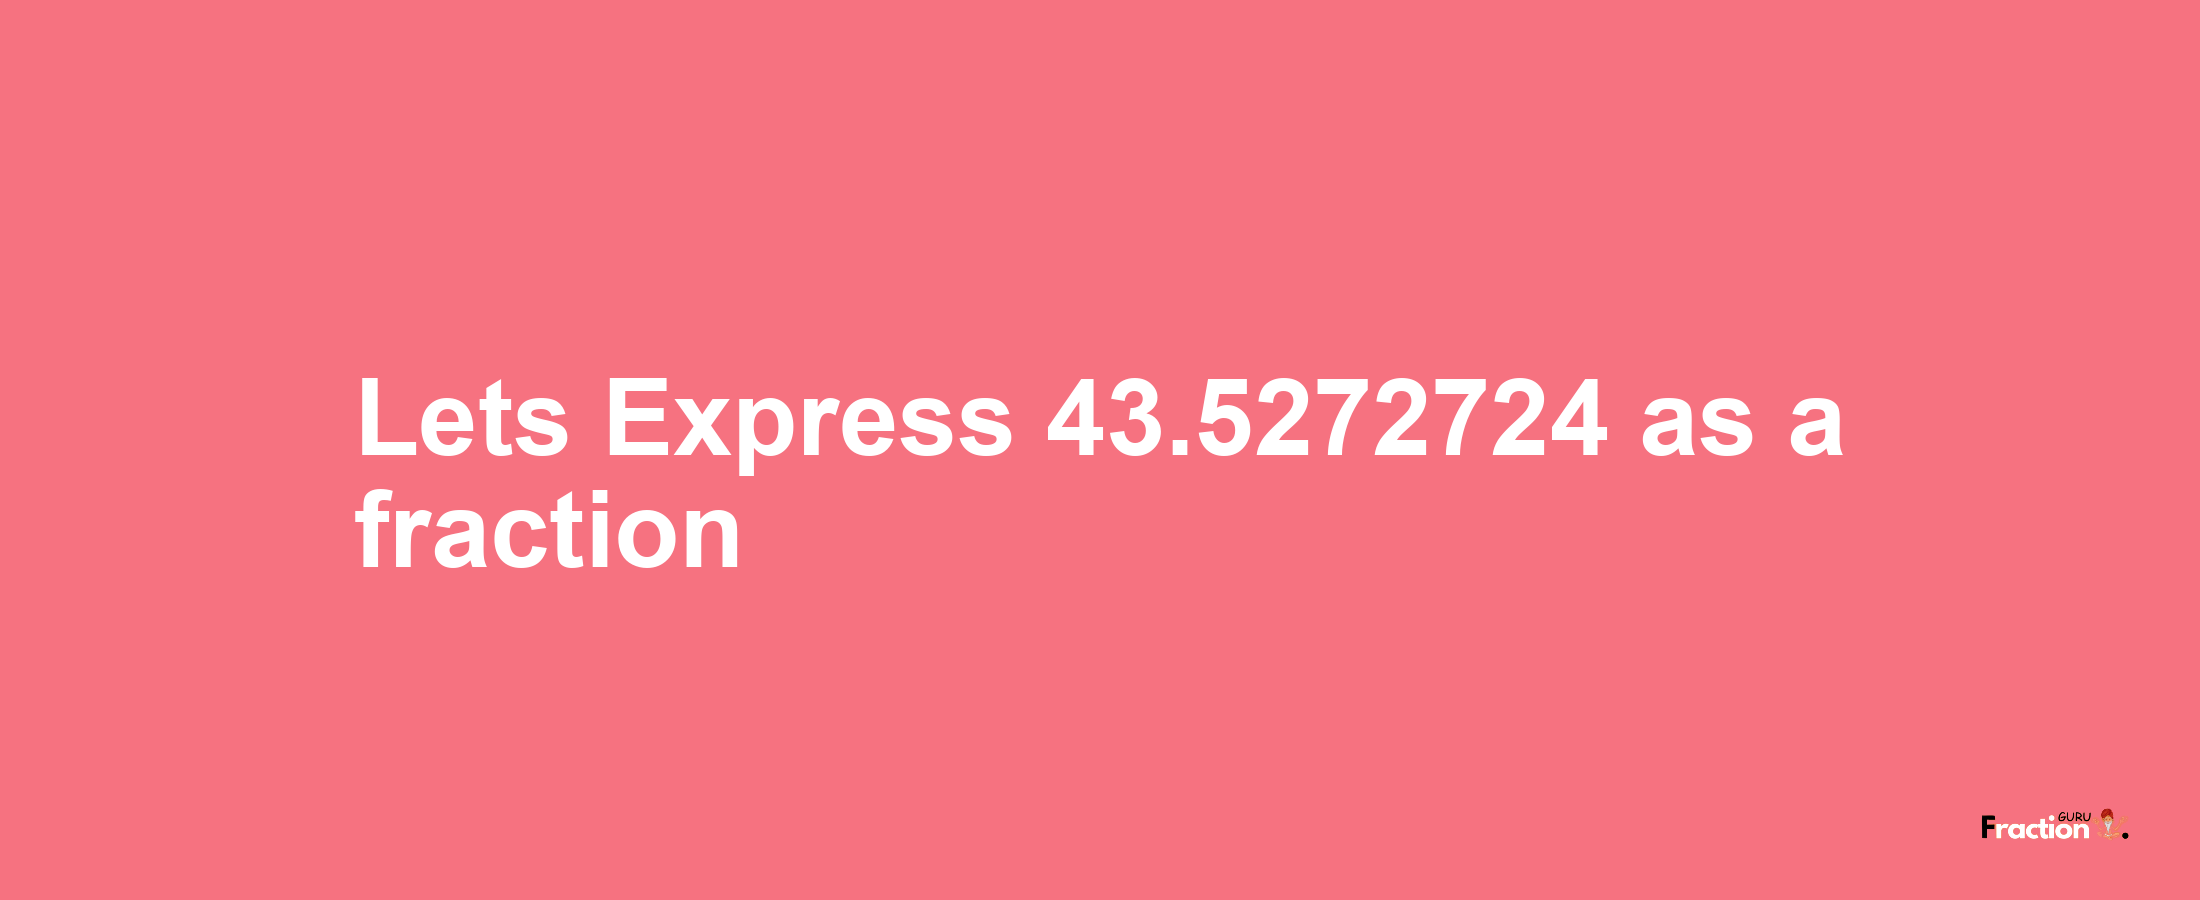 Lets Express 43.5272724 as afraction